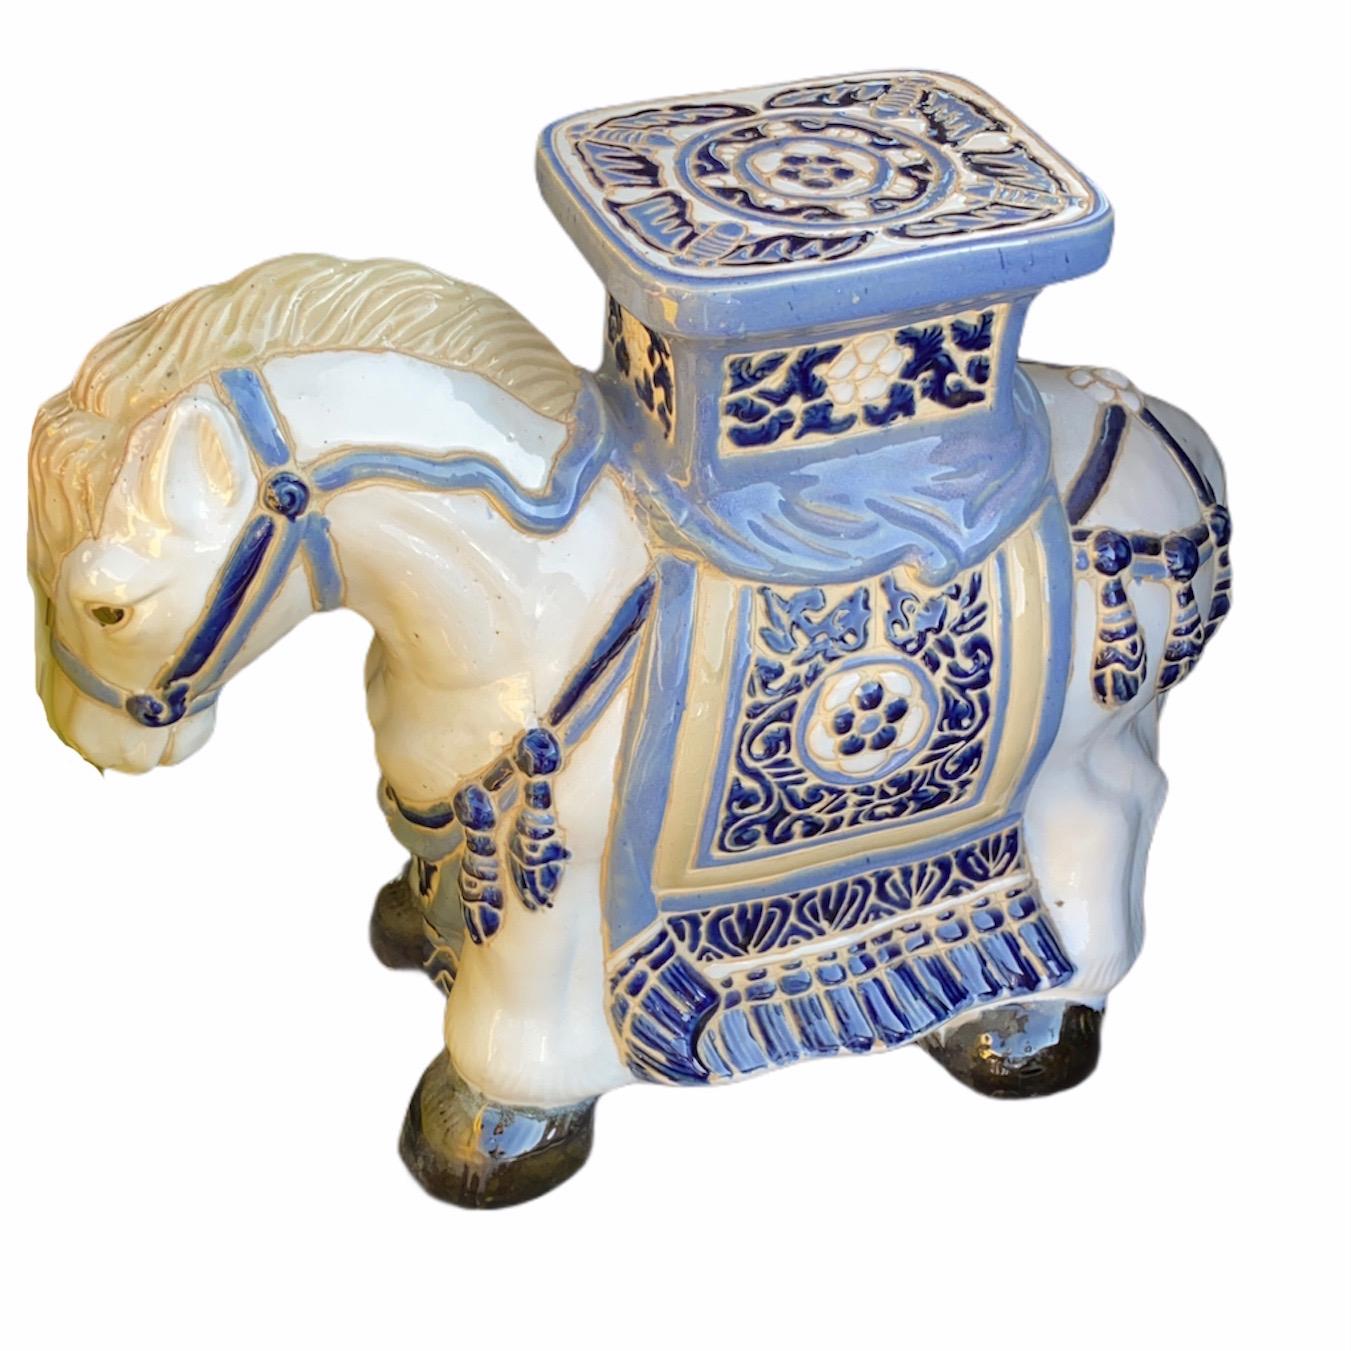 Mid-20th century glazed ceramic Horse Pony garden stool, flower pot seat, patio decoration or side table. Handmade of ceramic. Nice addition to your home, patio, yard or garden.
  